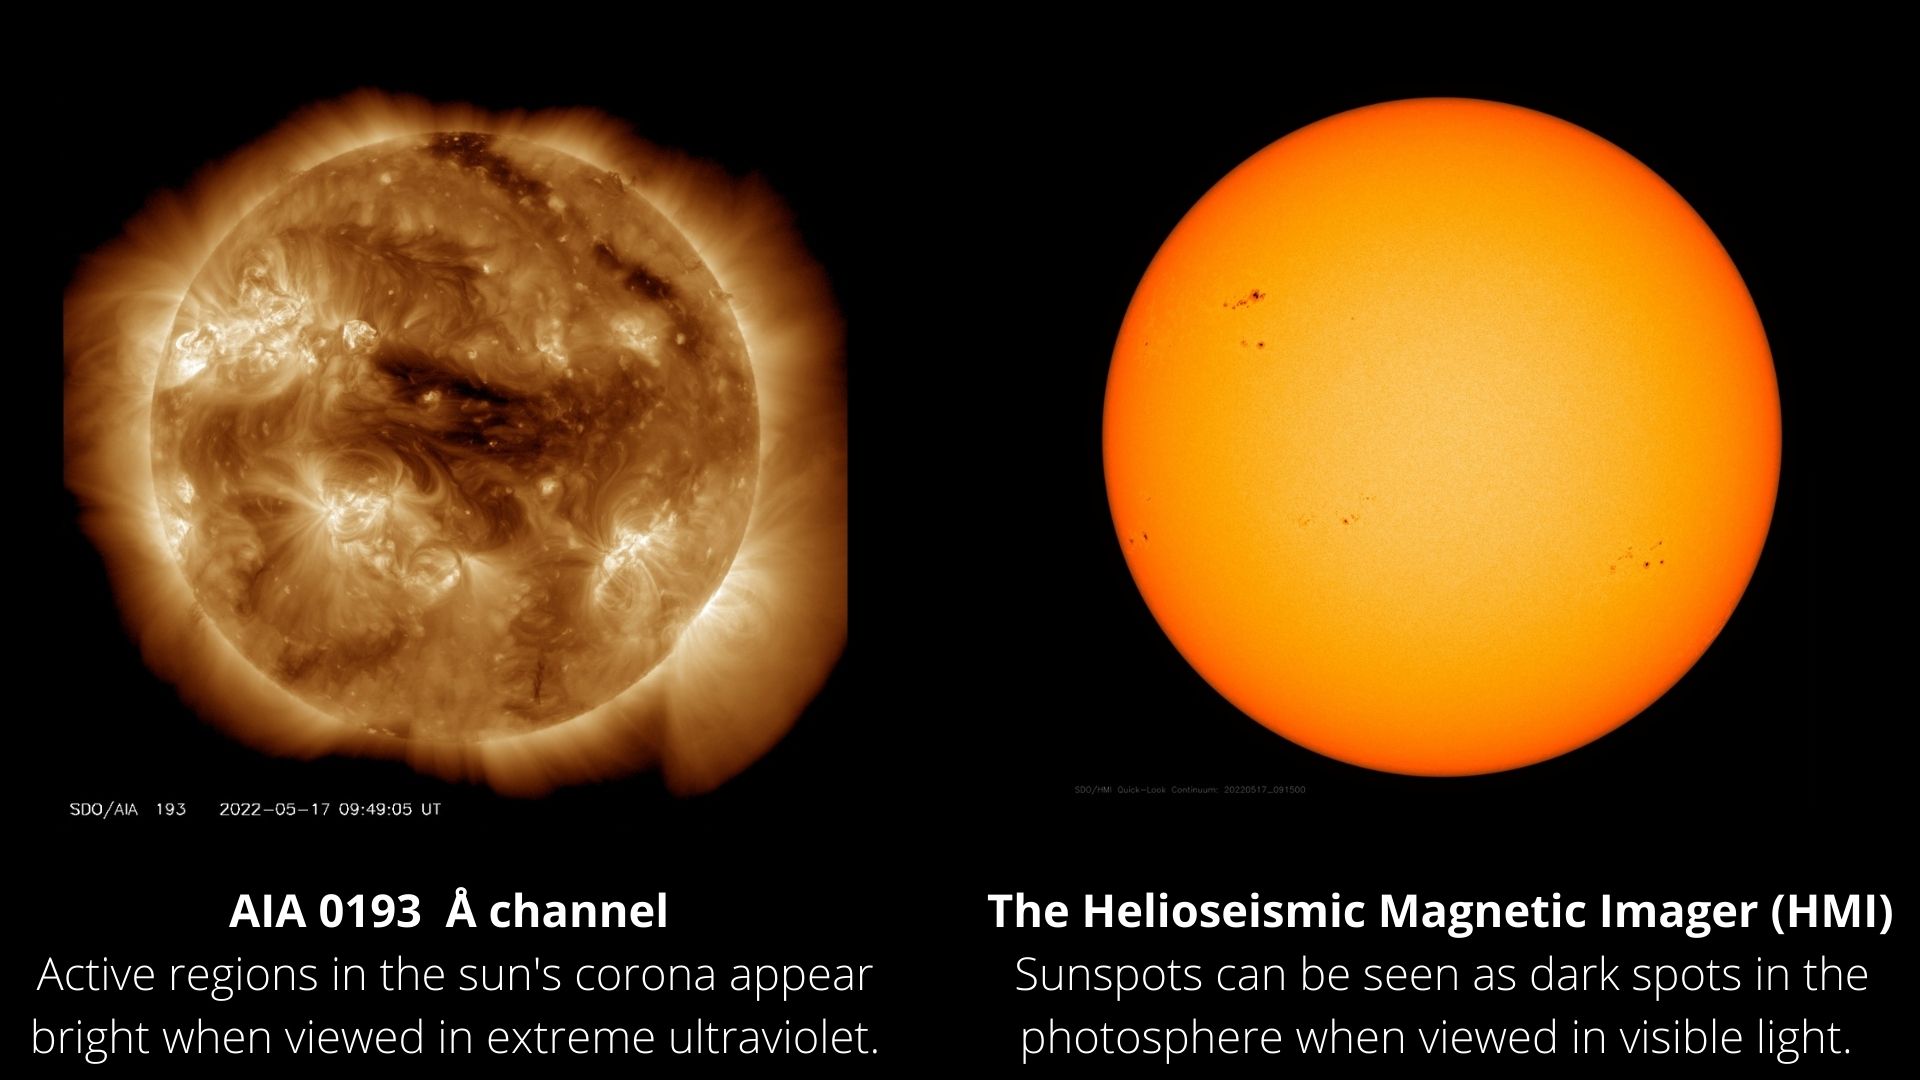 Two images of the sun, one on left shows bright regions of solar activity and on the right black sunspots are visible on the surface.